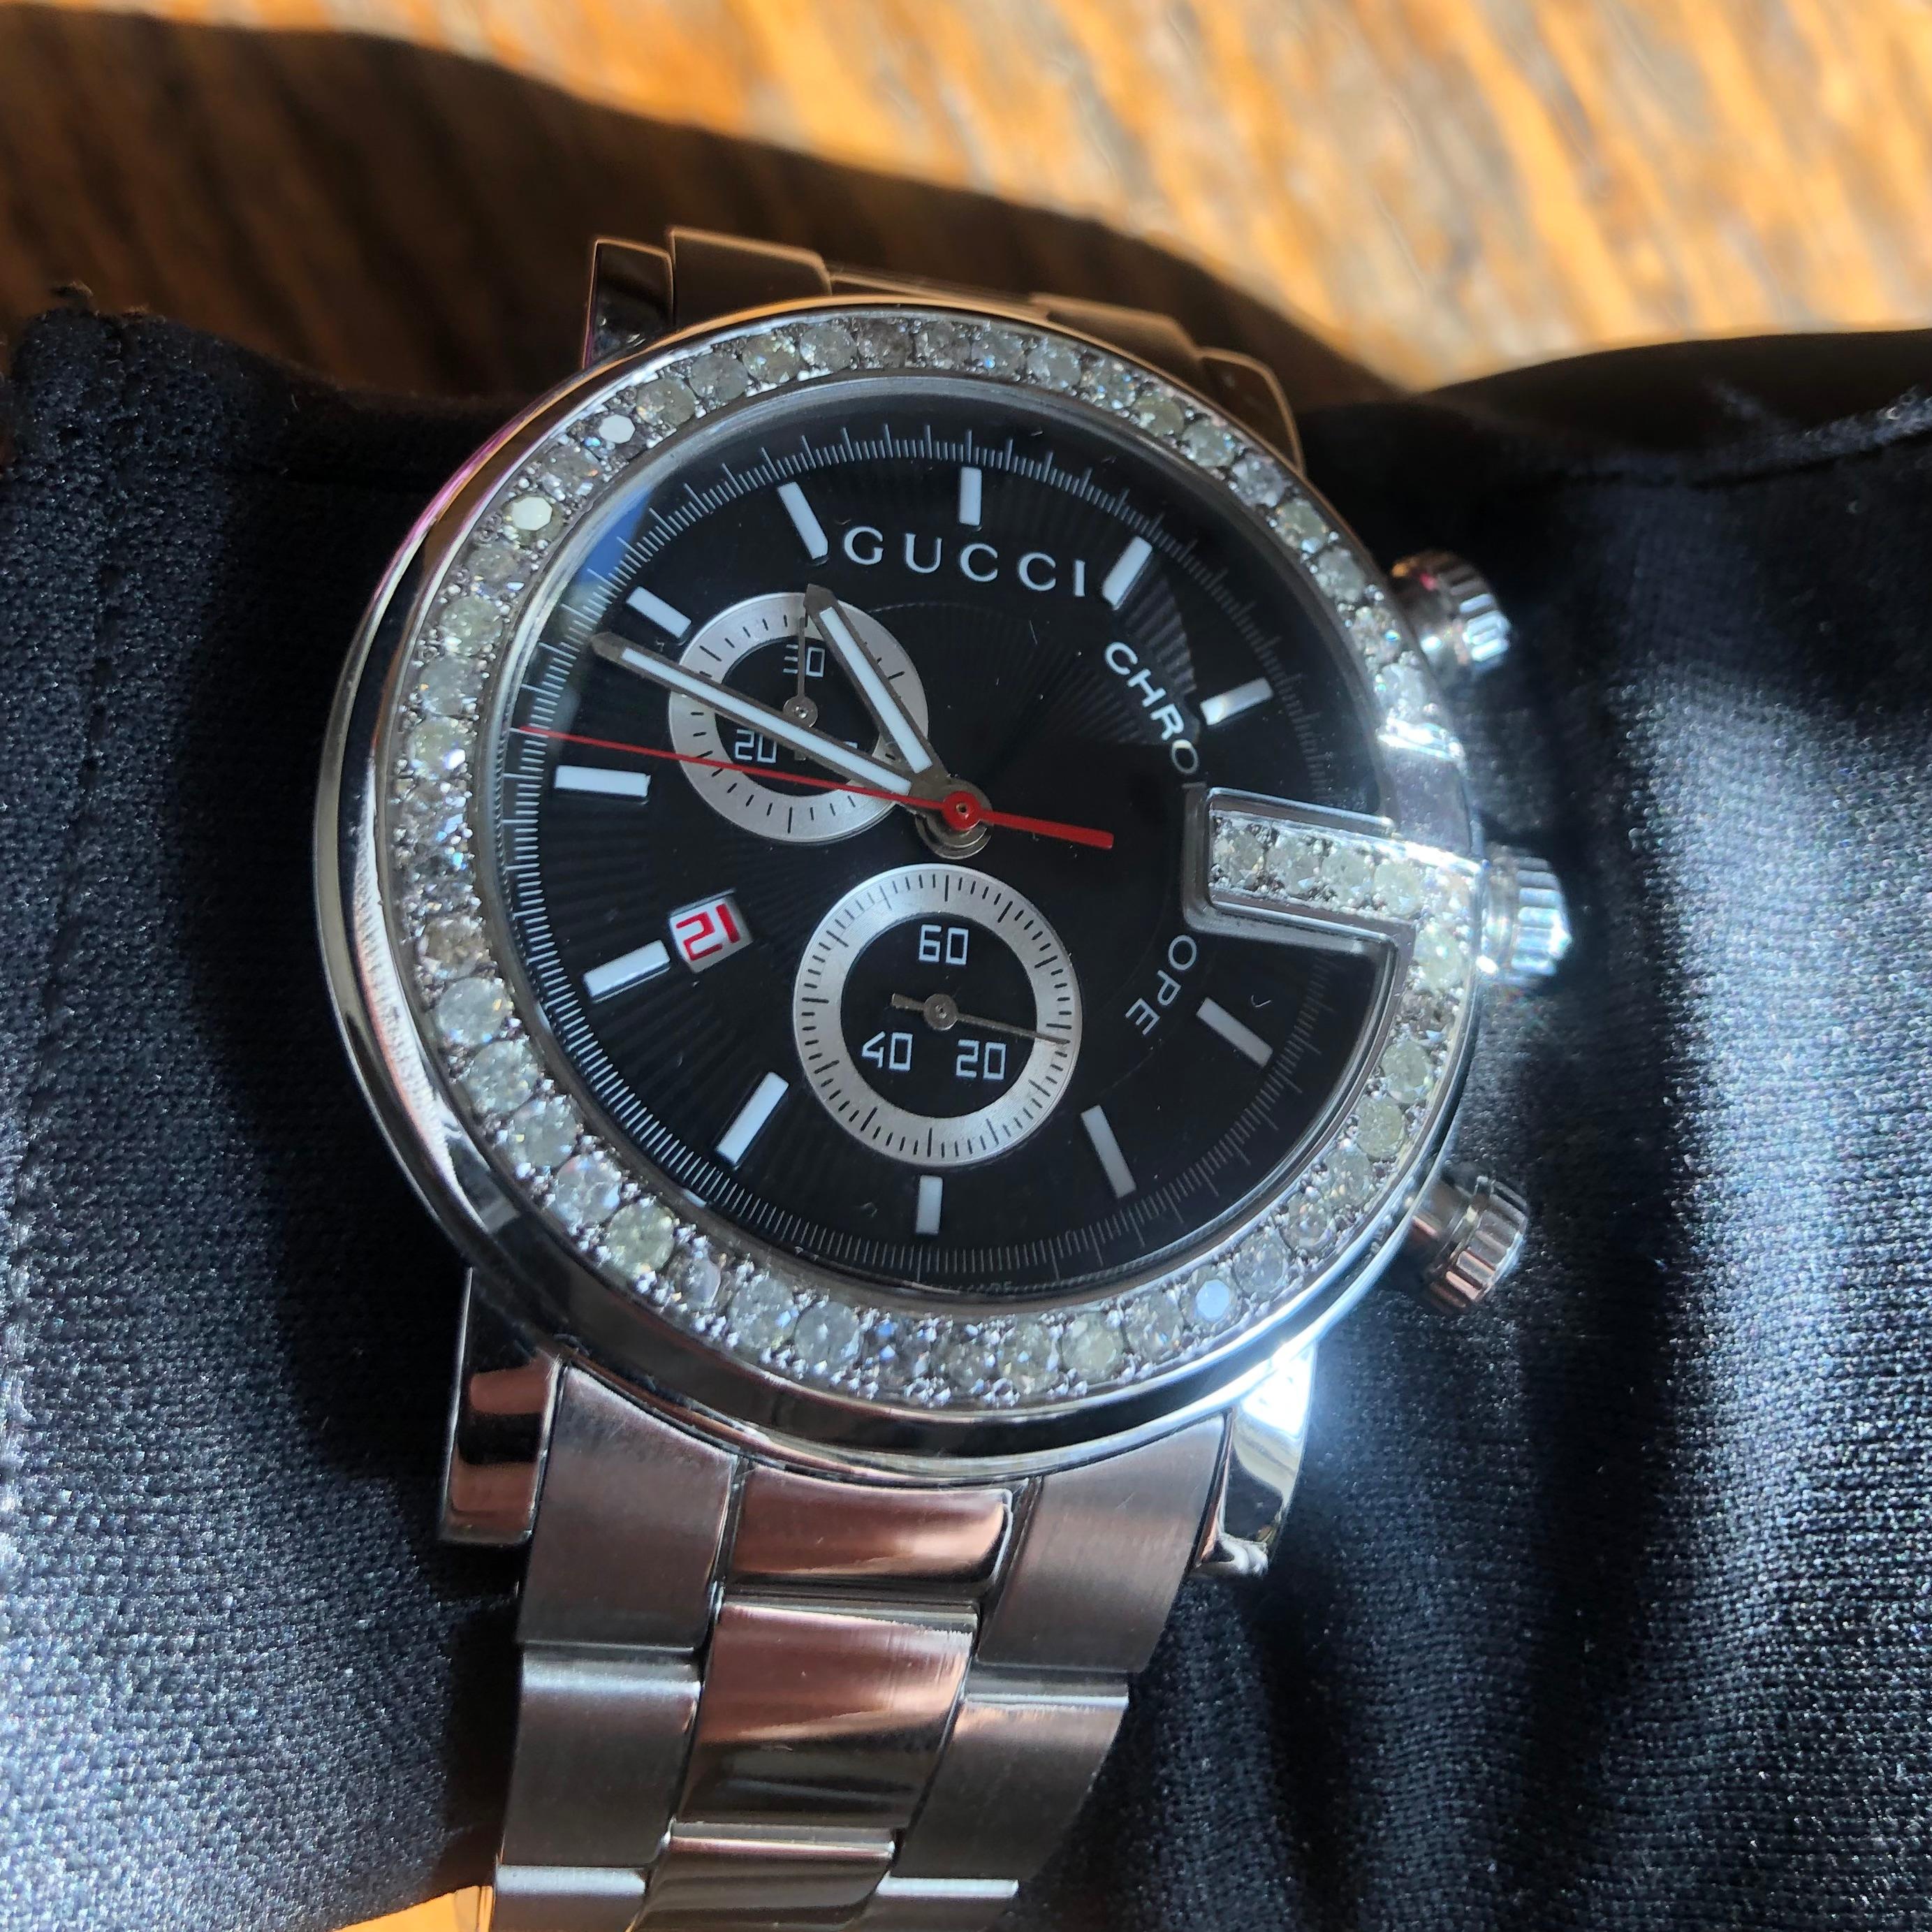 Custom Diamond Gucci 101M G Chrono Swiss Made Black-dial 44mm Watch with box and booklet papers.

Original Gucci Bezel is customized hand-set with approx. 3.00 carats of natural genuine earth-mined SI-I Diamonds. The diamonds shine beautifully in